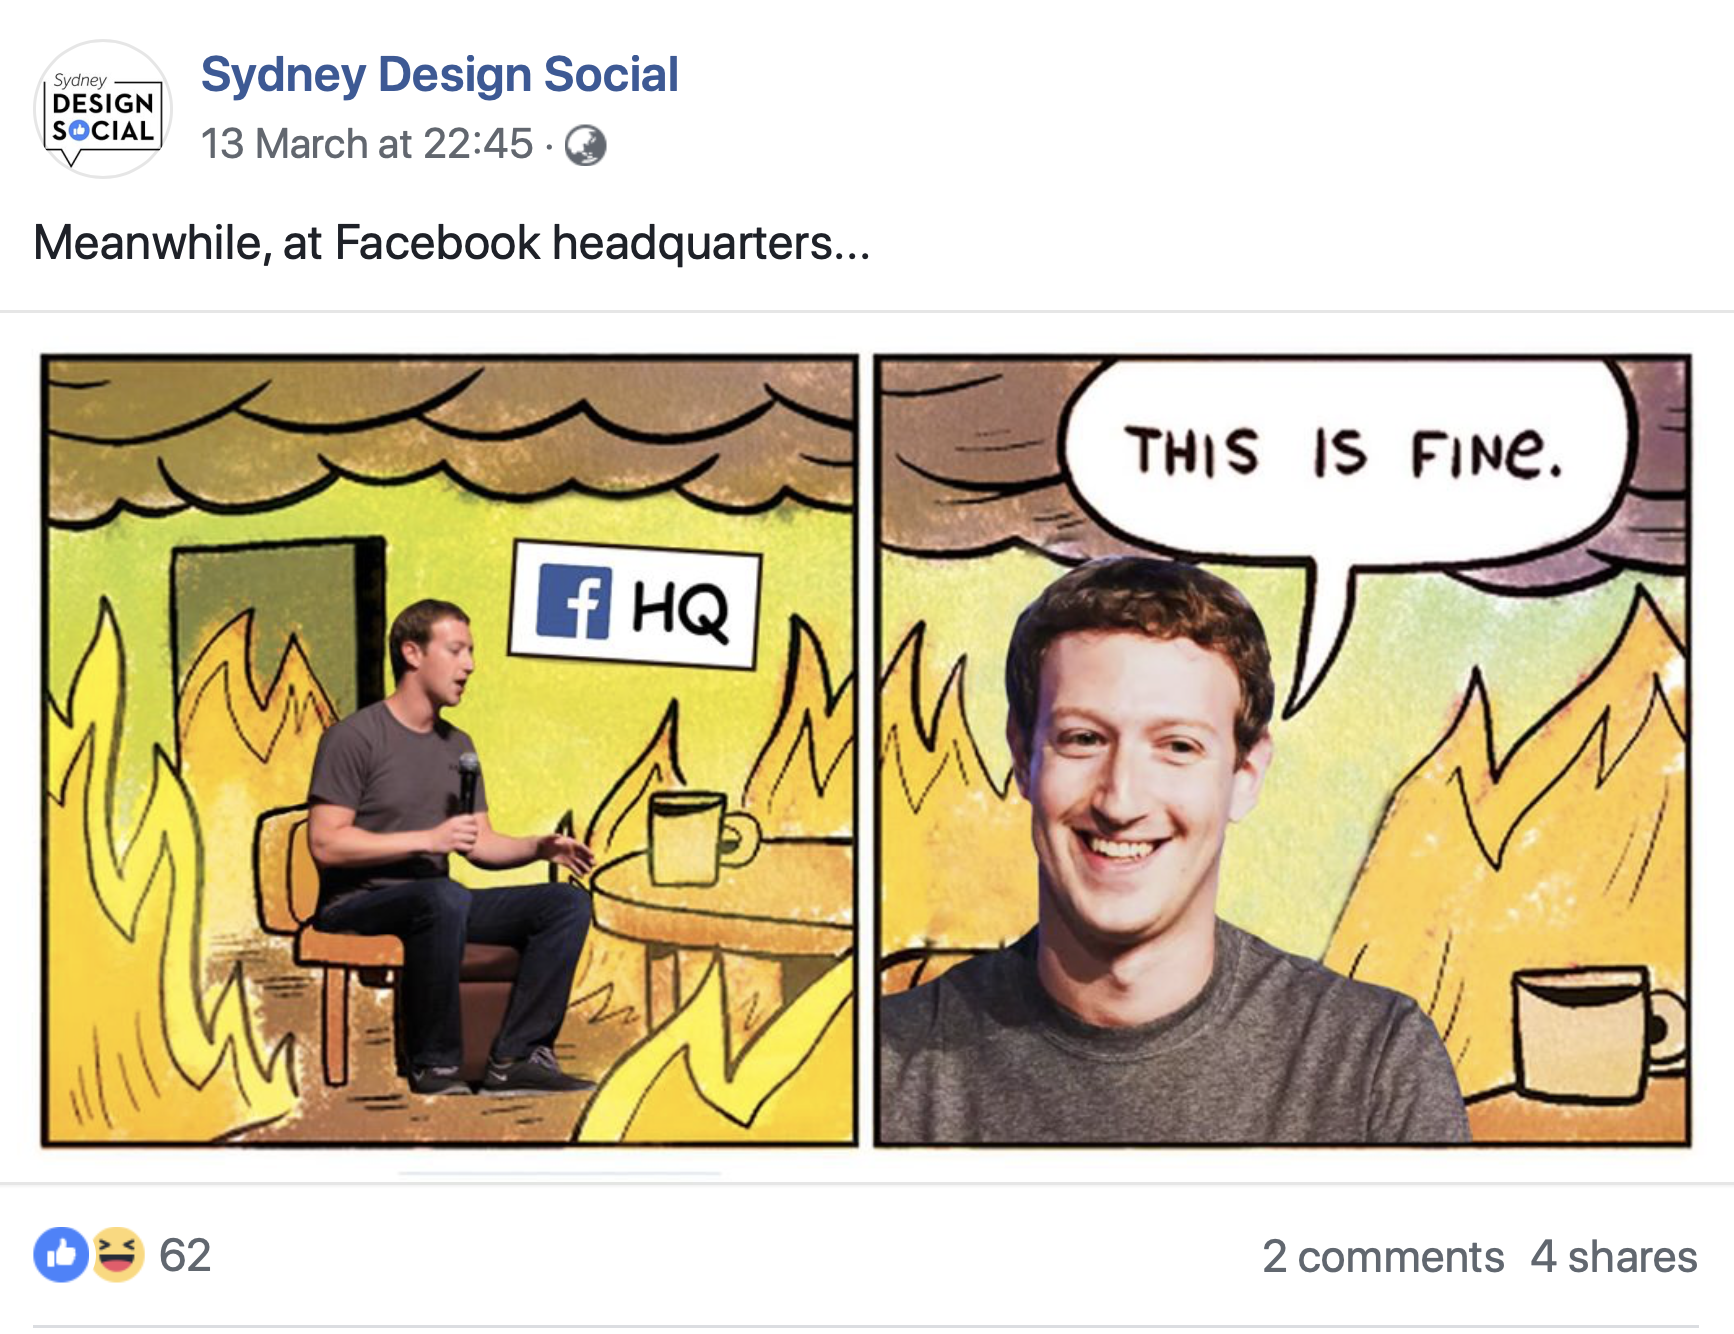 Meme created by Sydney Design social depicting Mark Zuckerberg being overly calm about the Facebook crash